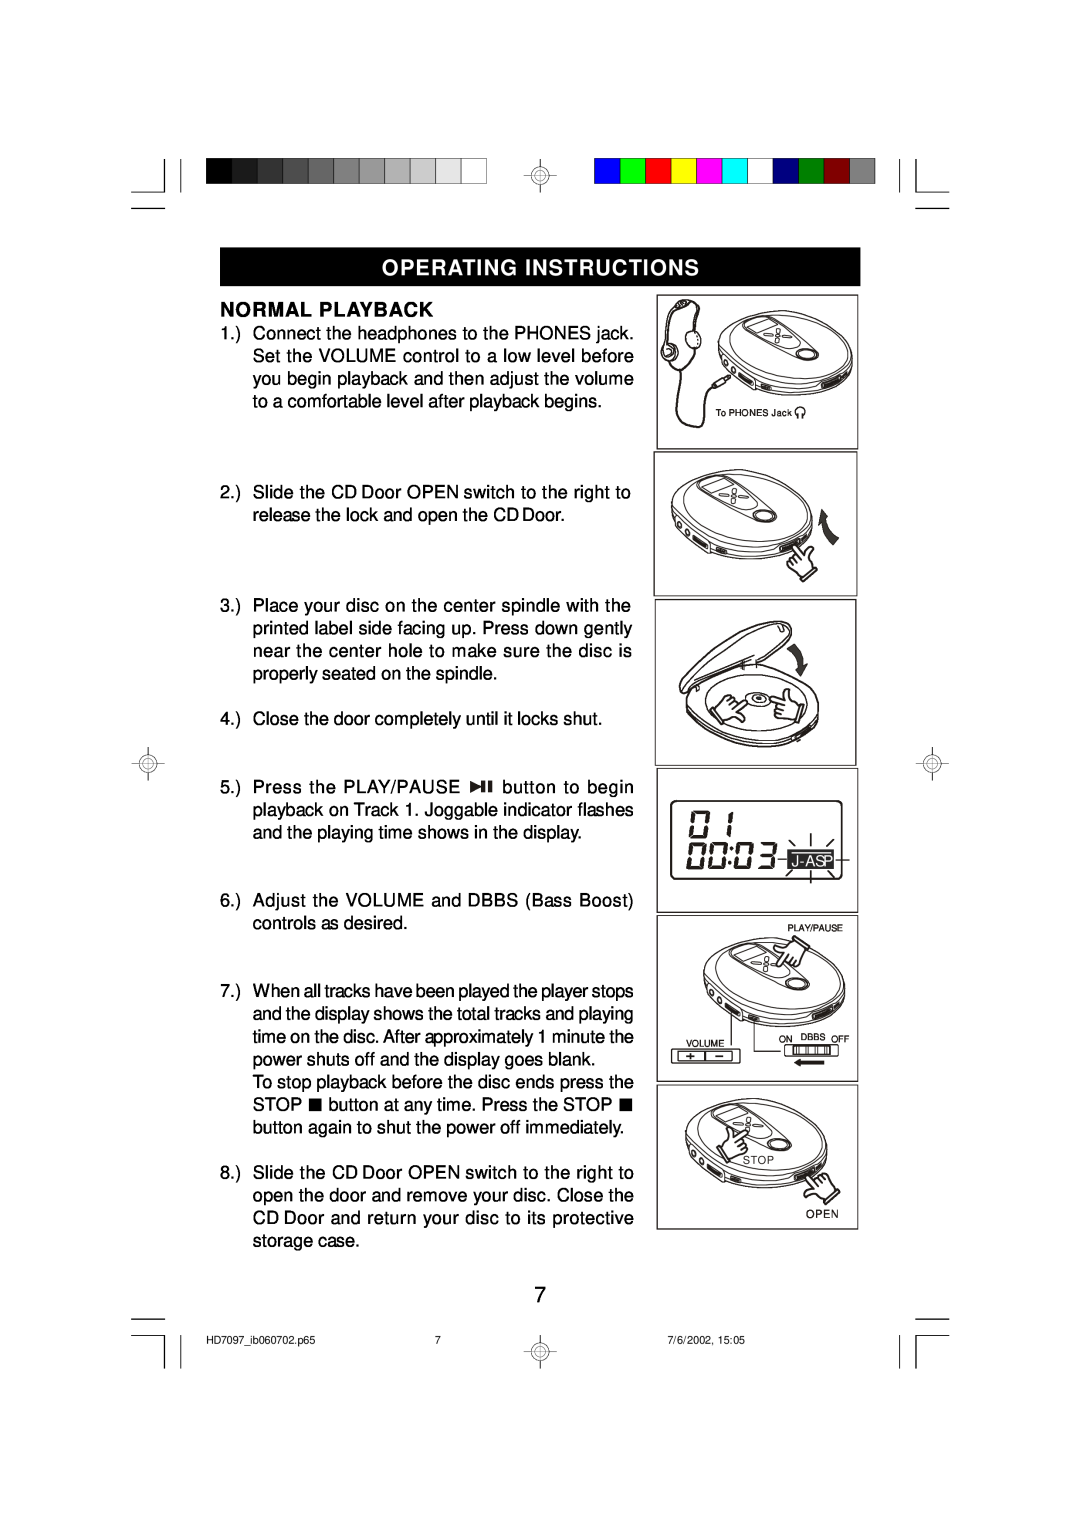 Emerson HD7097 owner manual Operating Instructions, Normal Playback 